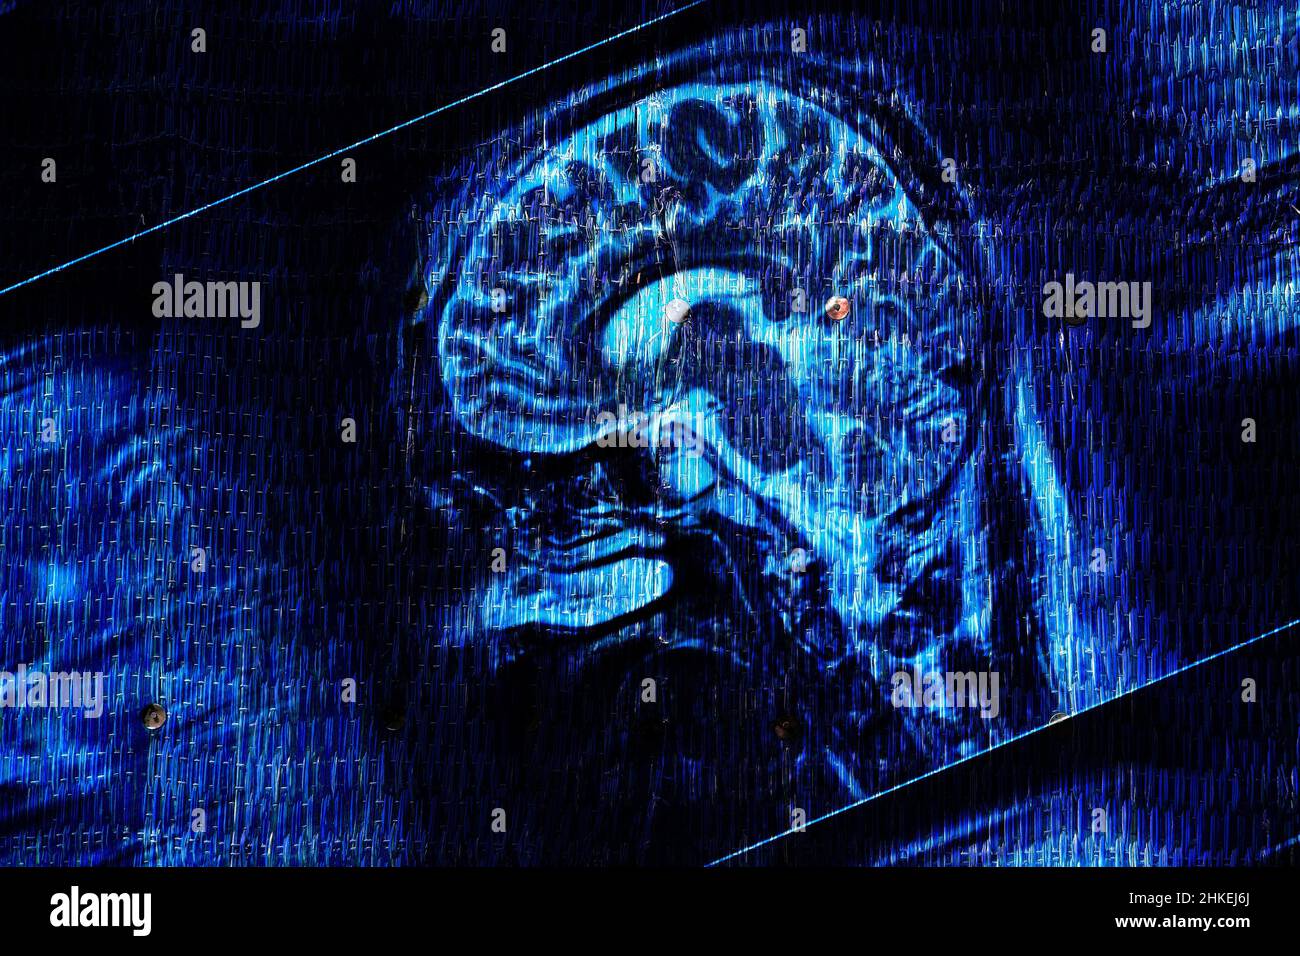 Part of a MRI scan of a human head as a medical background. Stock Photo